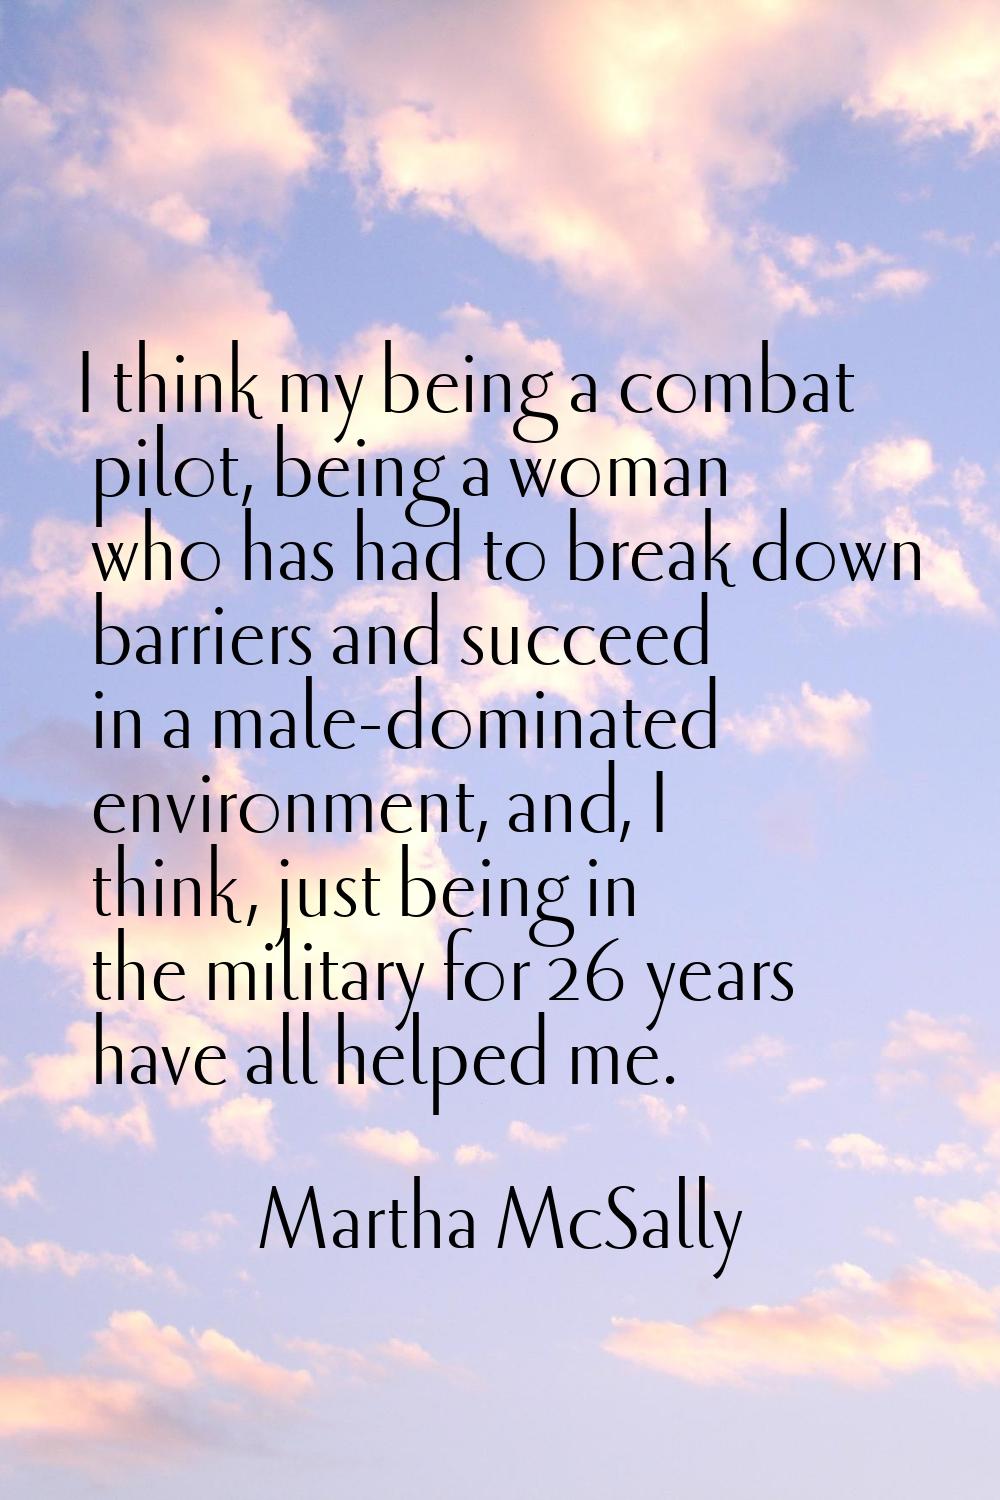 I think my being a combat pilot, being a woman who has had to break down barriers and succeed in a 